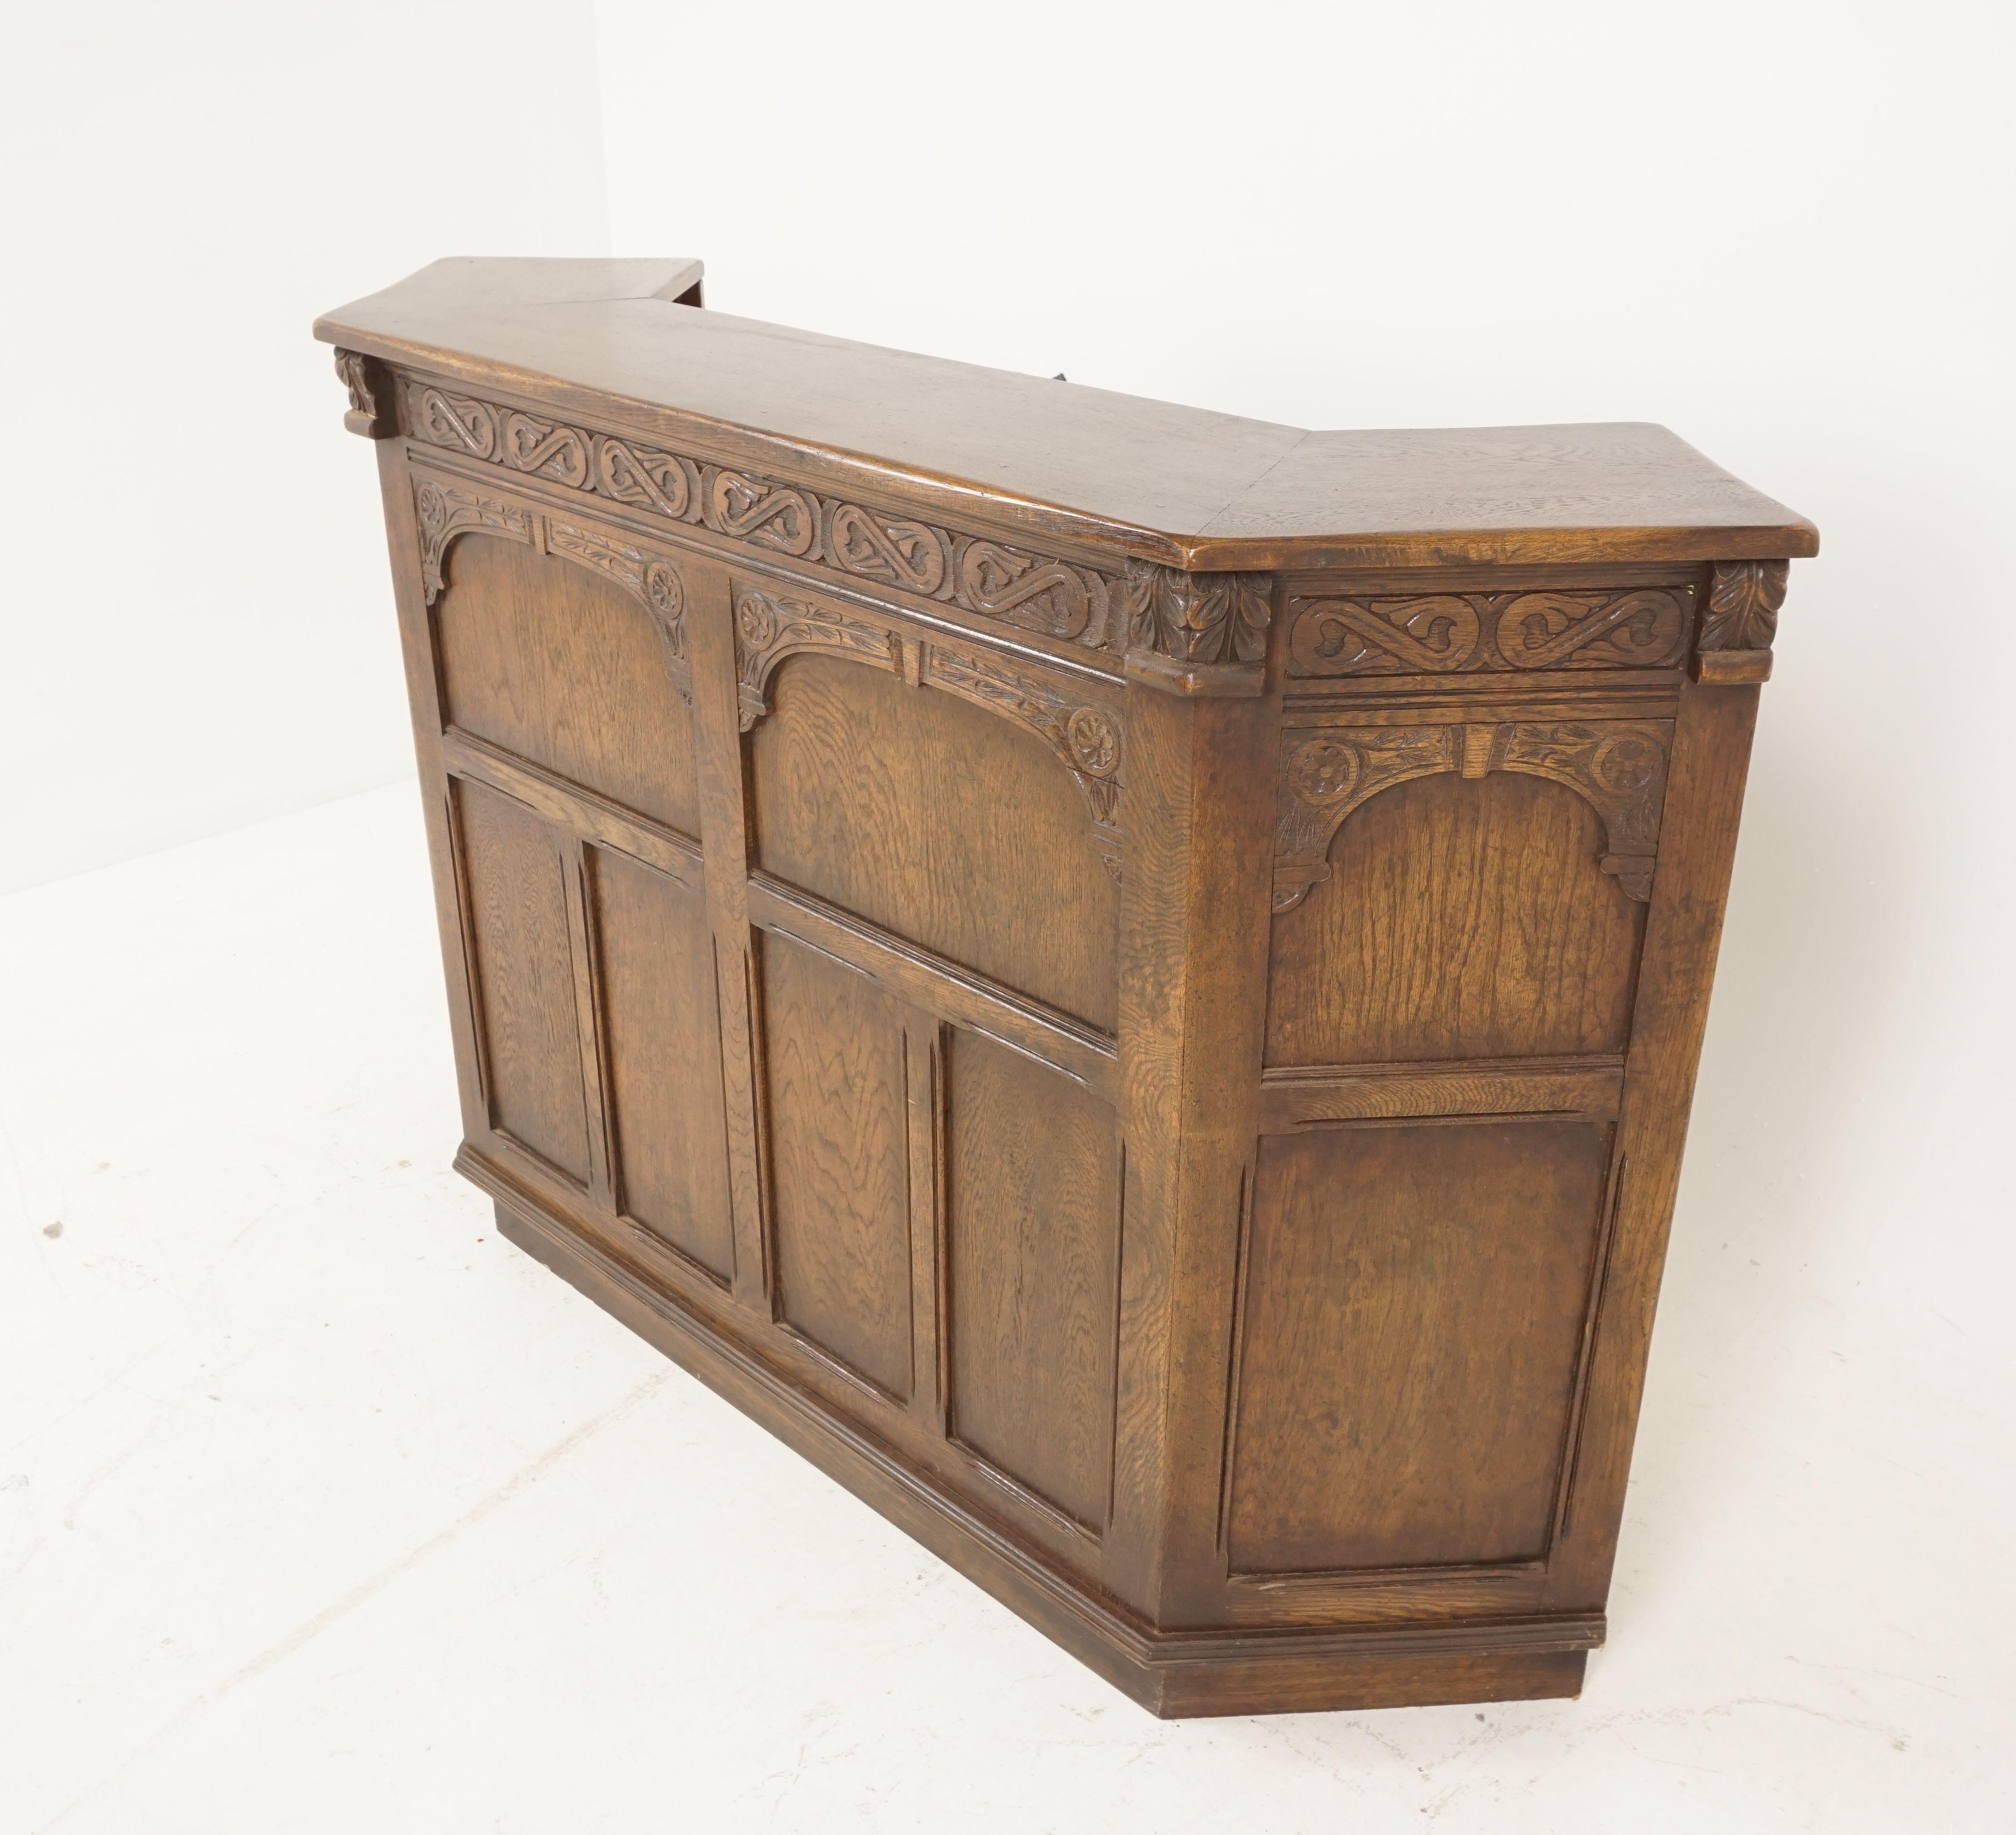 Antique oak cocktail bar, carved oak home bar, antique furniture, Scotland, 1930

Scotland, 1930
Solid oak
Original finish
Moulded top with a canted angled shape on the ends
Carved frieze below top
Paneled carved front and ends
Standing on a